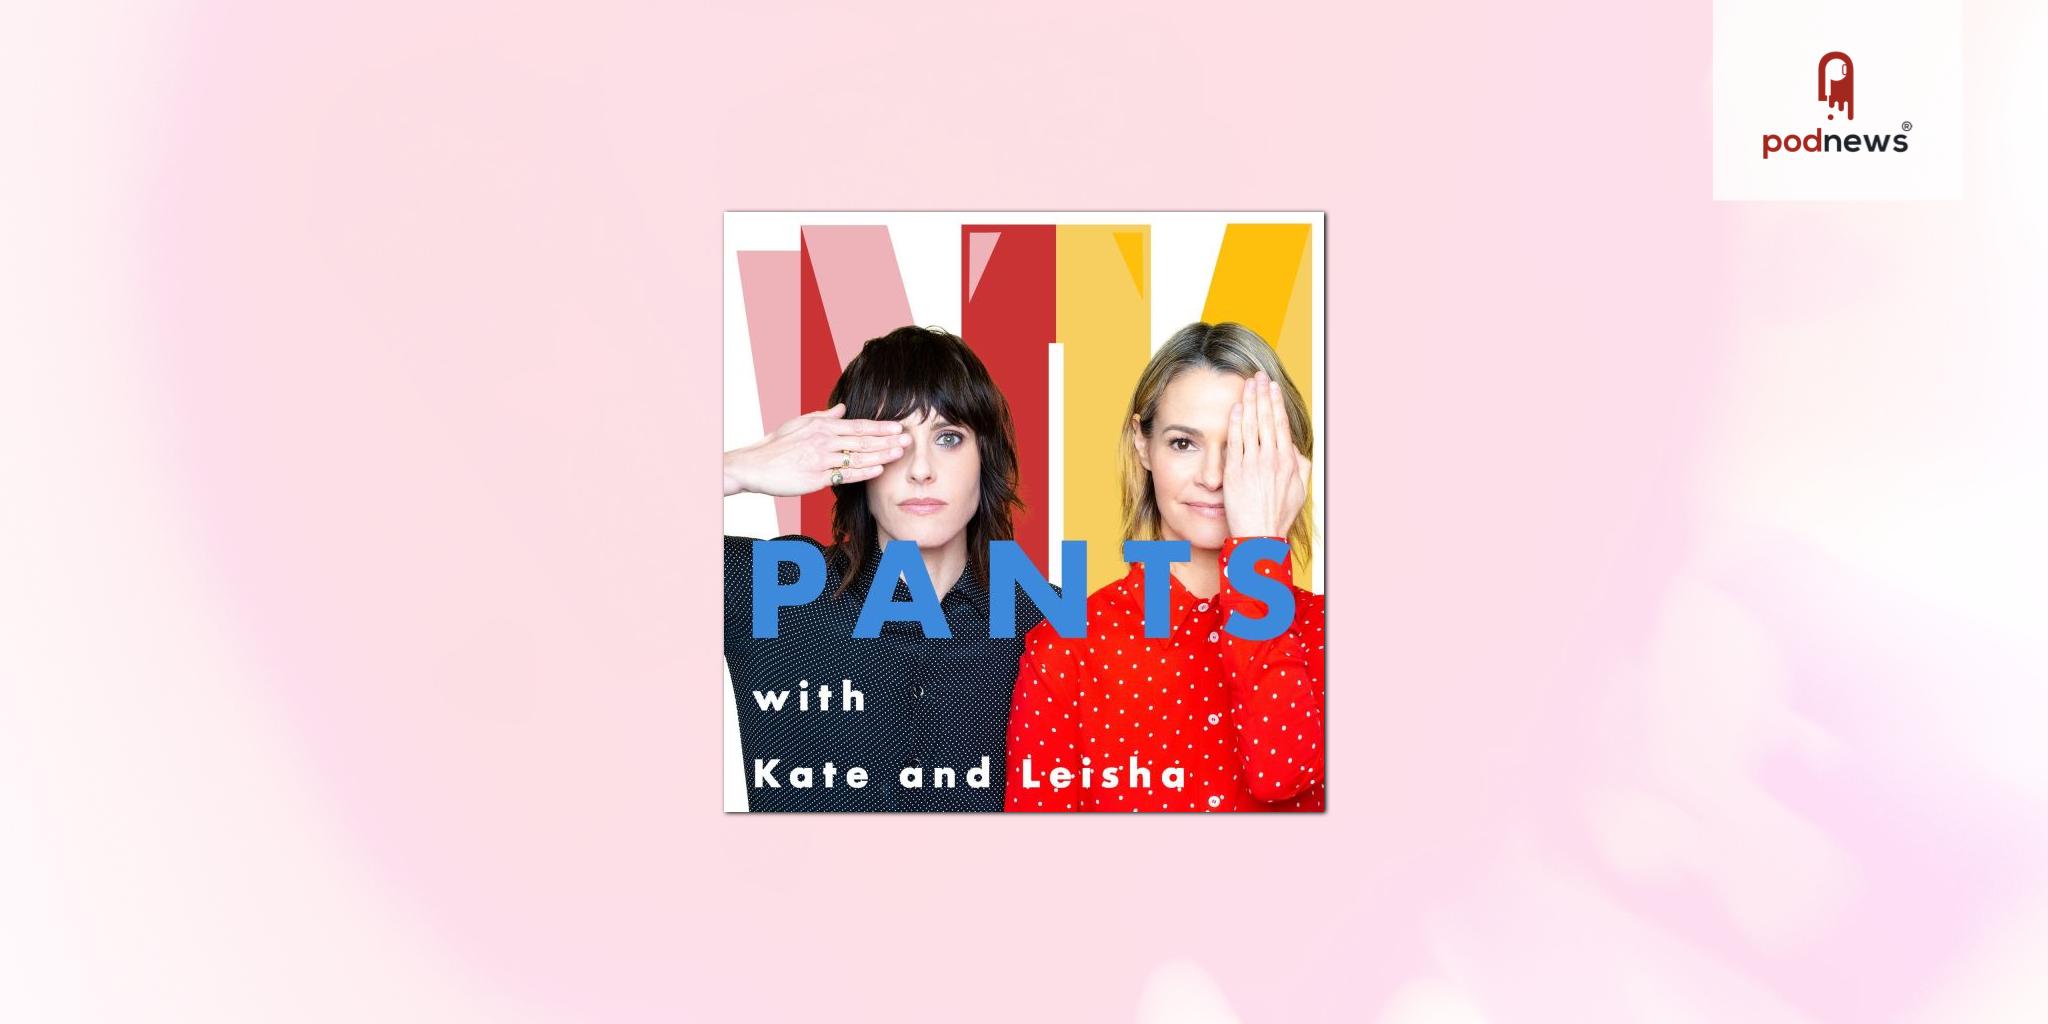 AdLarge Adds PANTS Podcast to Network Featuring Showtime’s “The L-Word” Stars